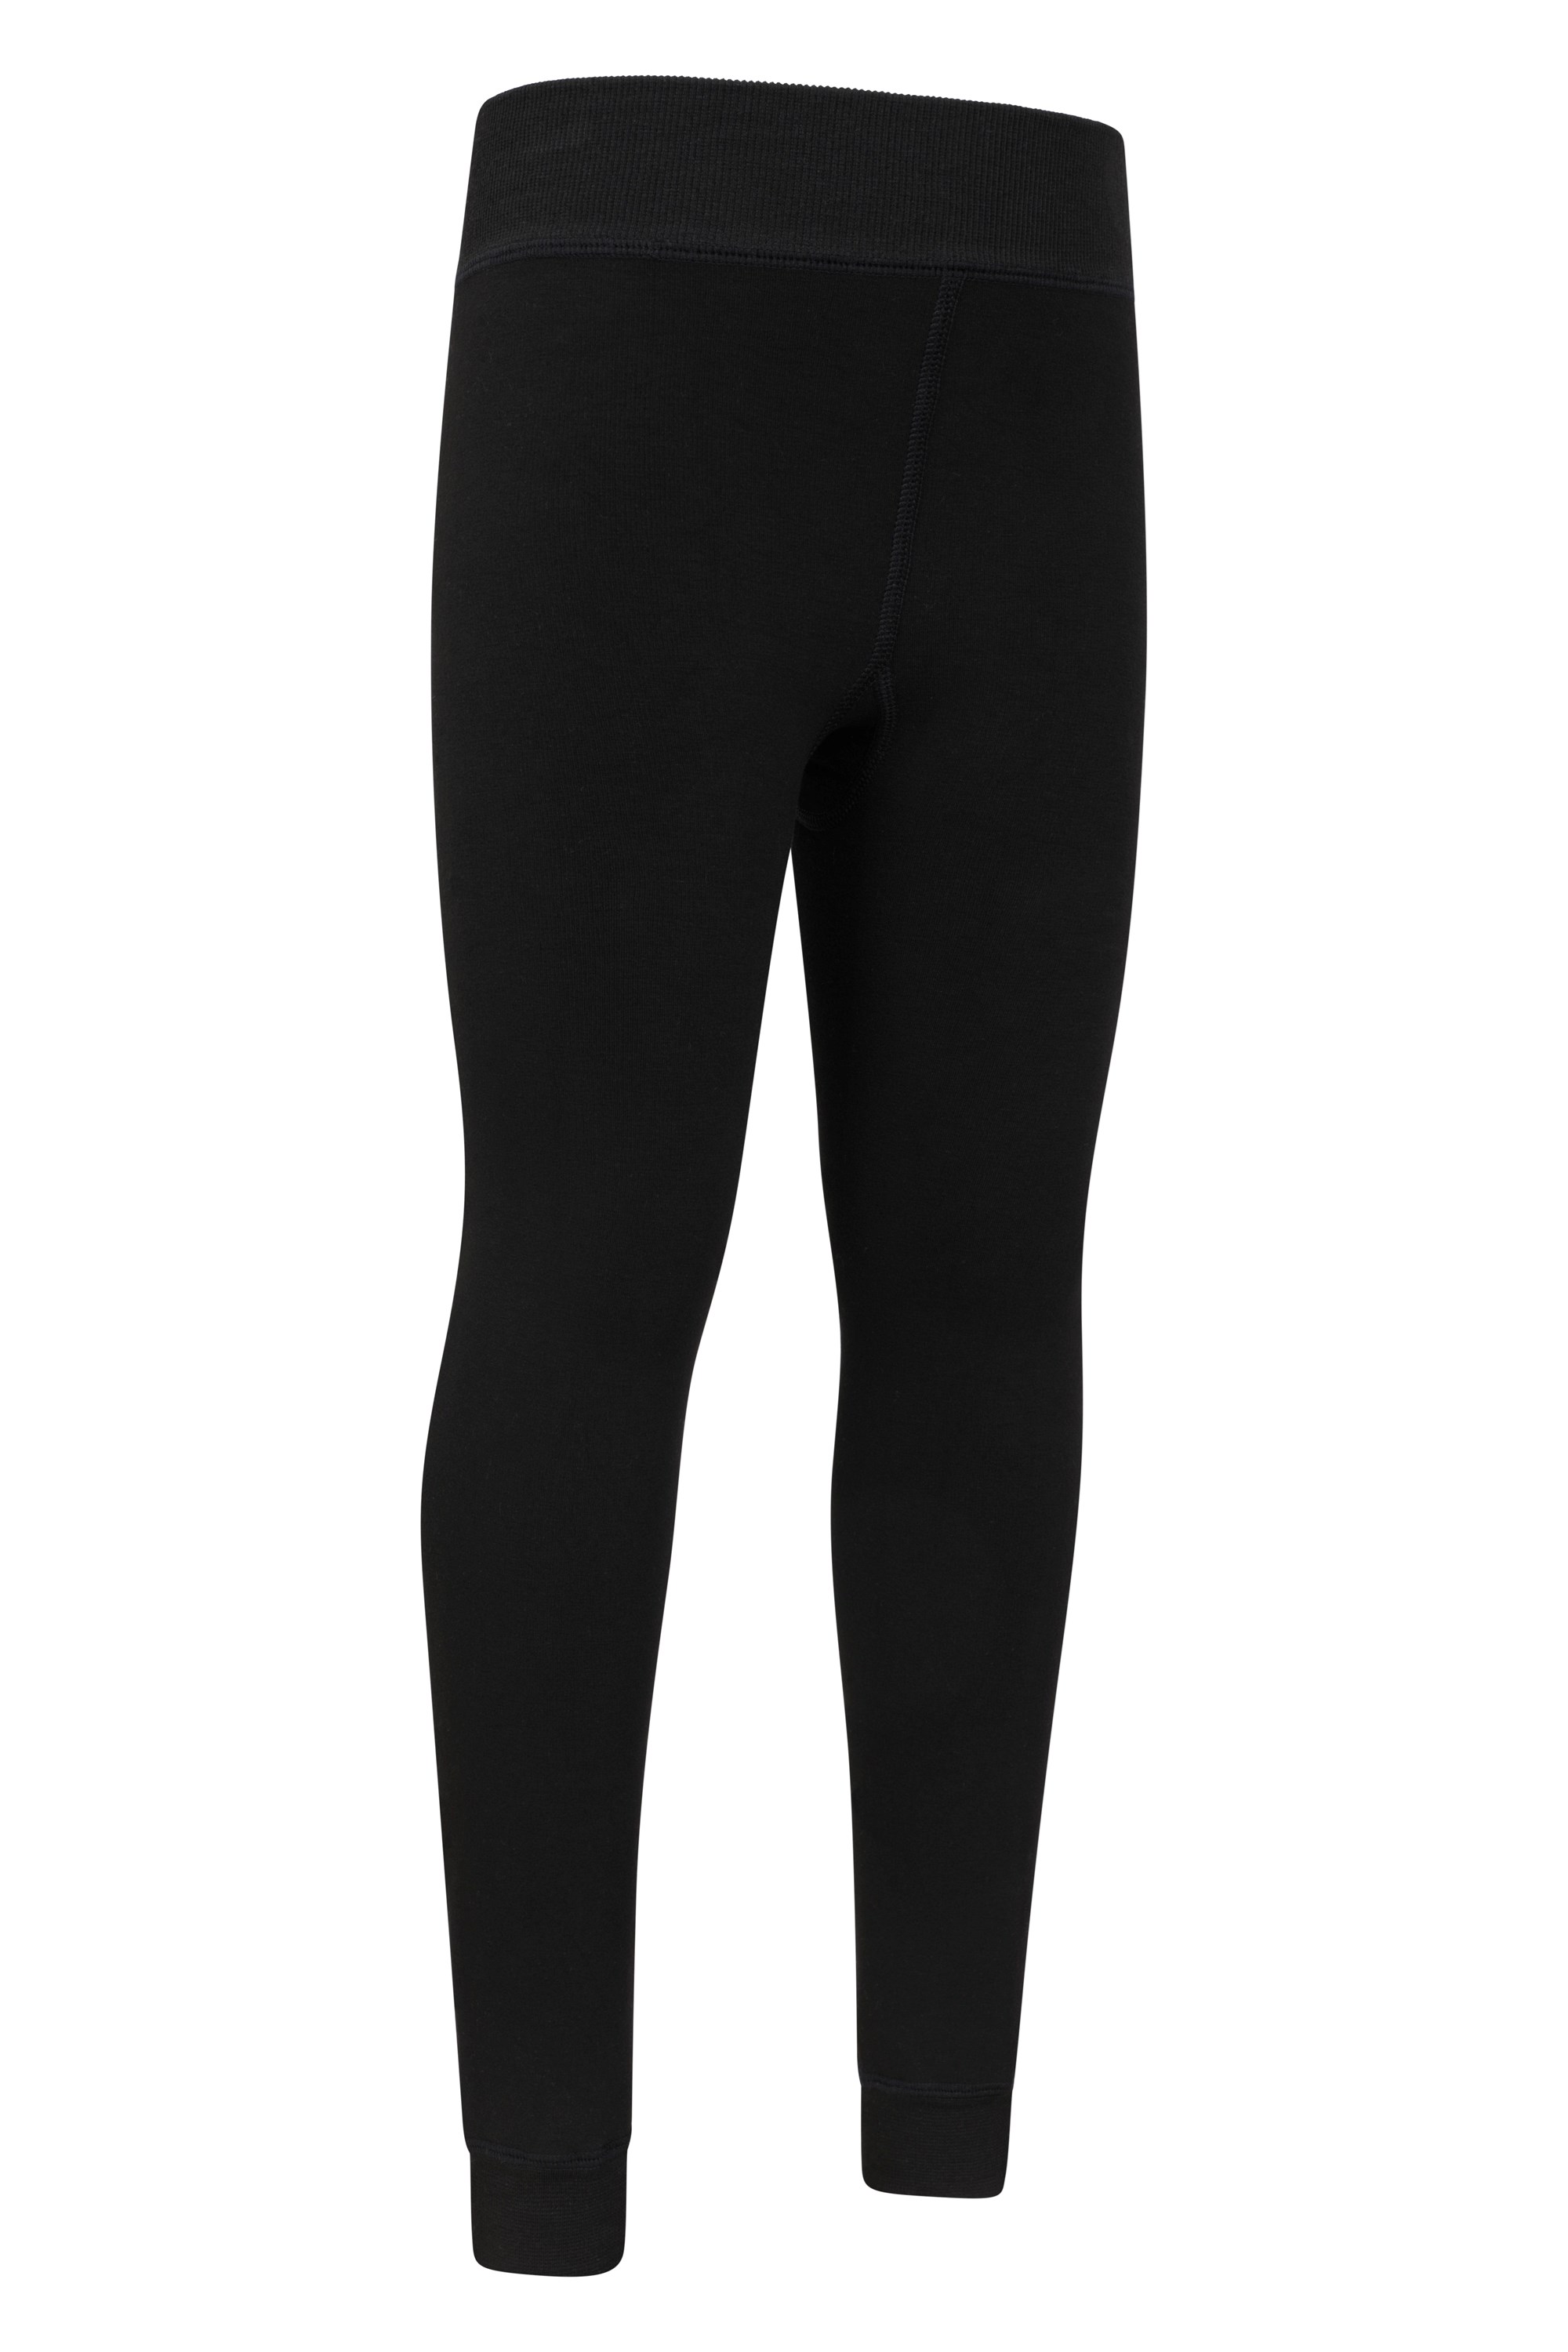 Trespass Kids Sherpa Lined Leggings AT200 Fuzzy